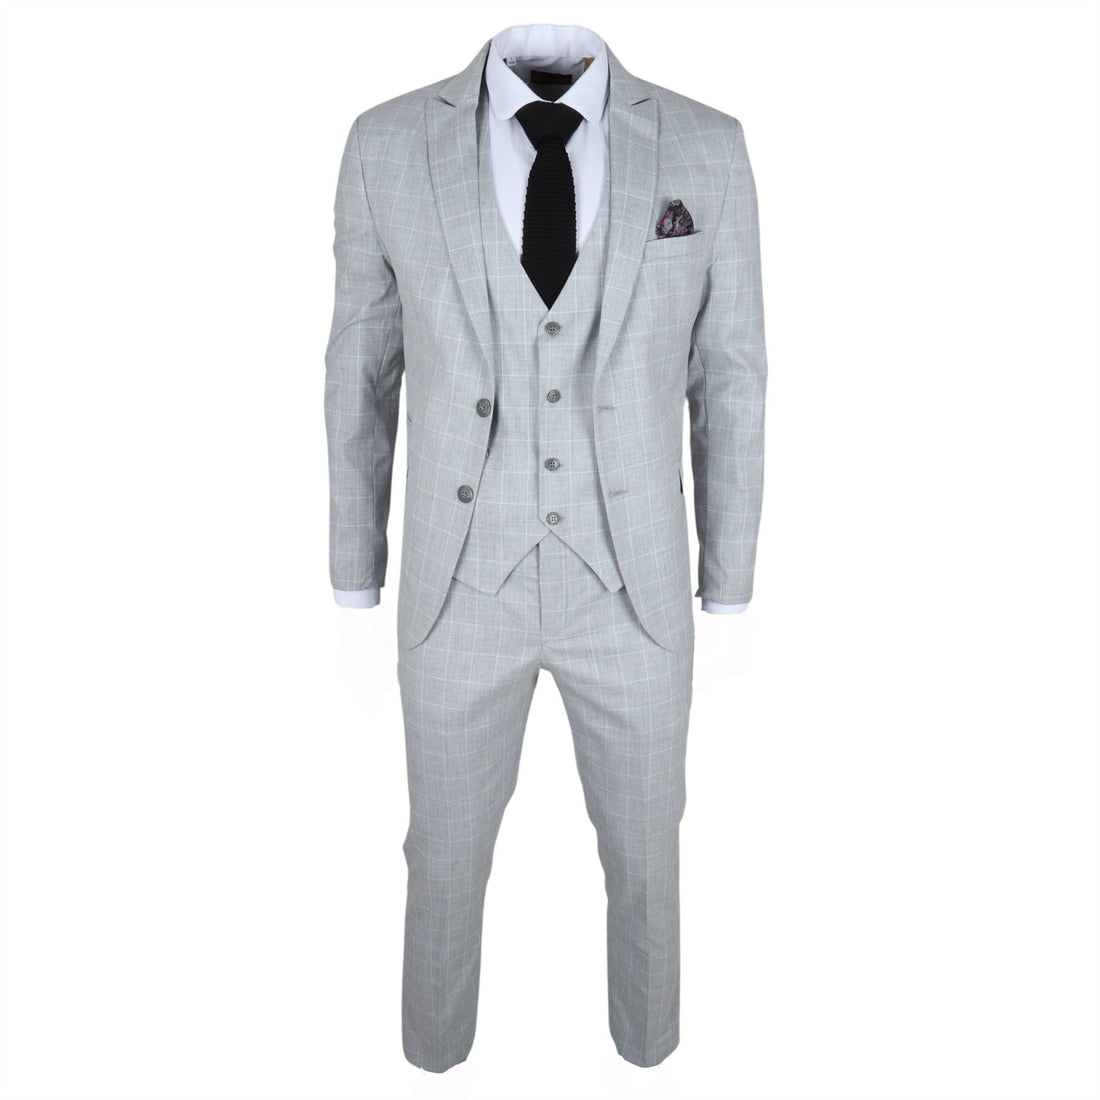 Men's Suit Grey Checked Tailored Fit 3 Piece Formal Dress